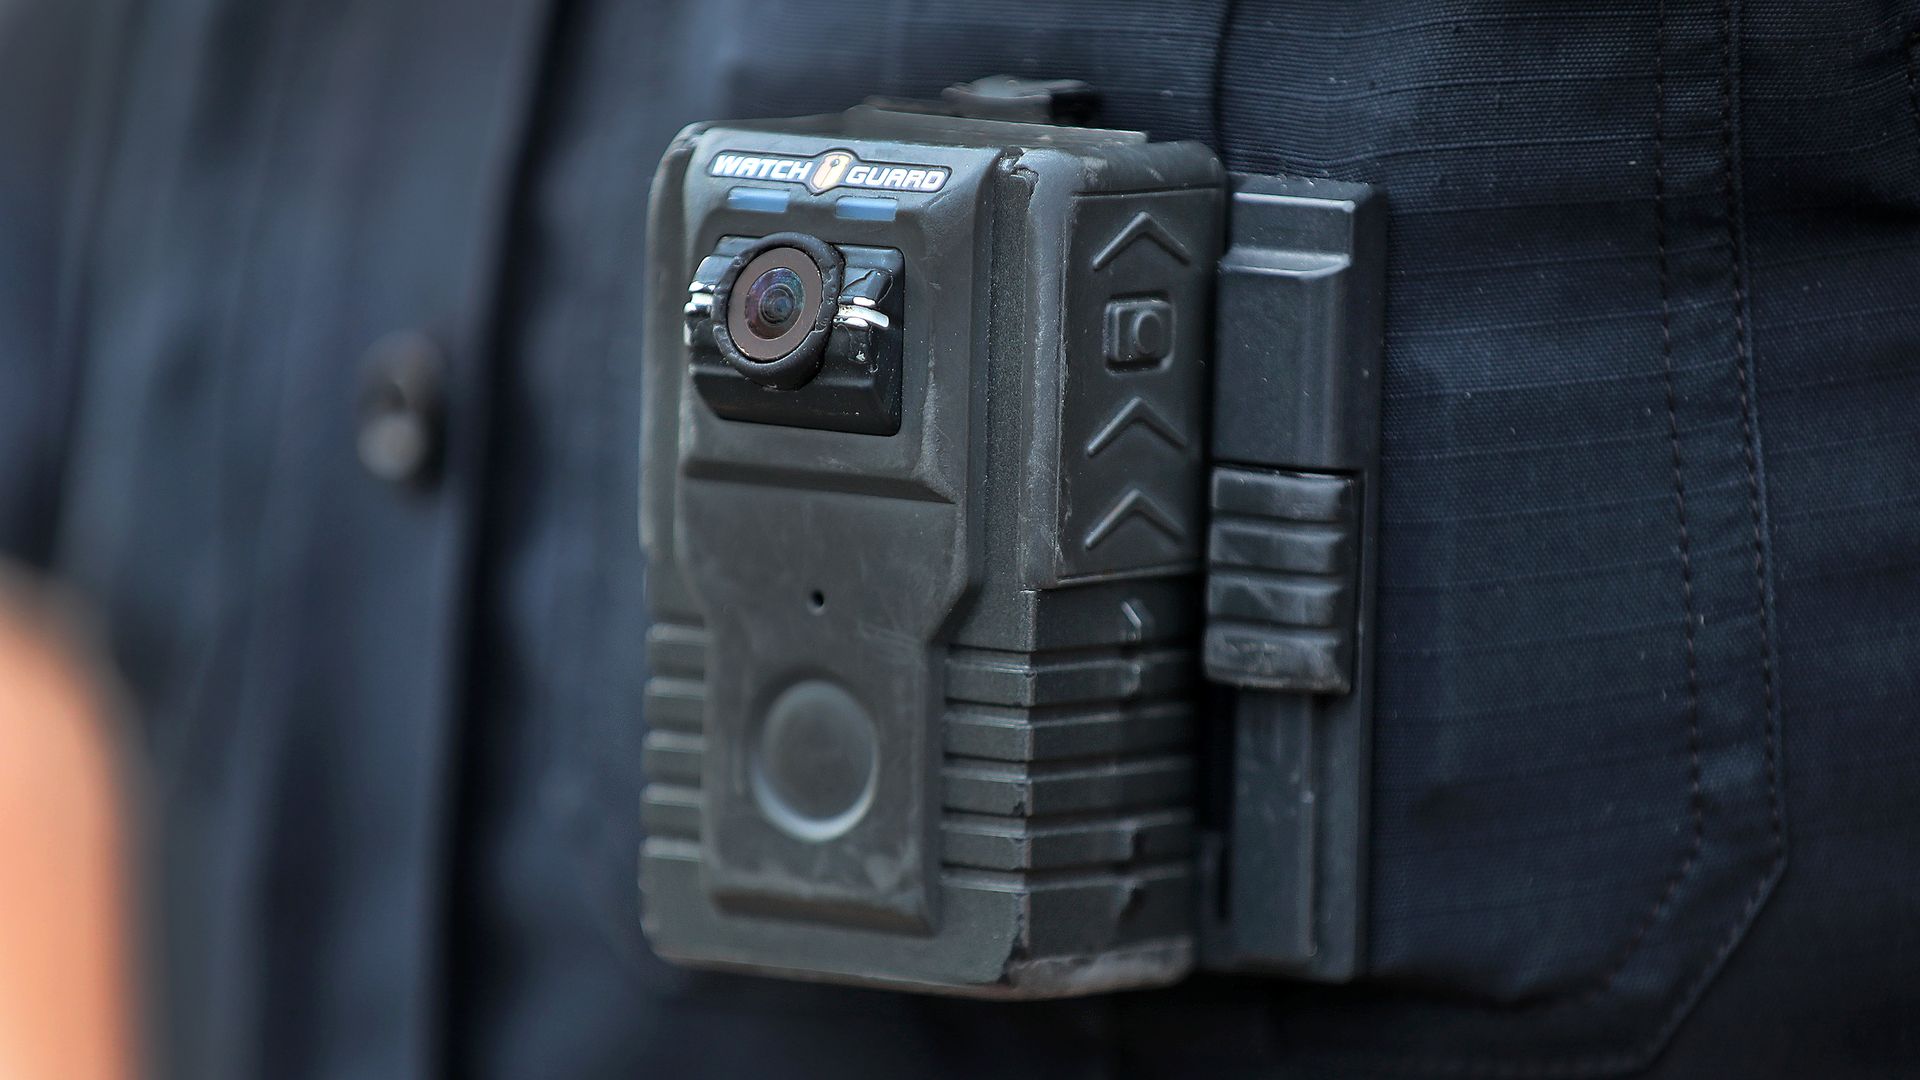  Ipswich police officer David Moore is pictured wearing a body camera in Ipswich, Massachusetts. 